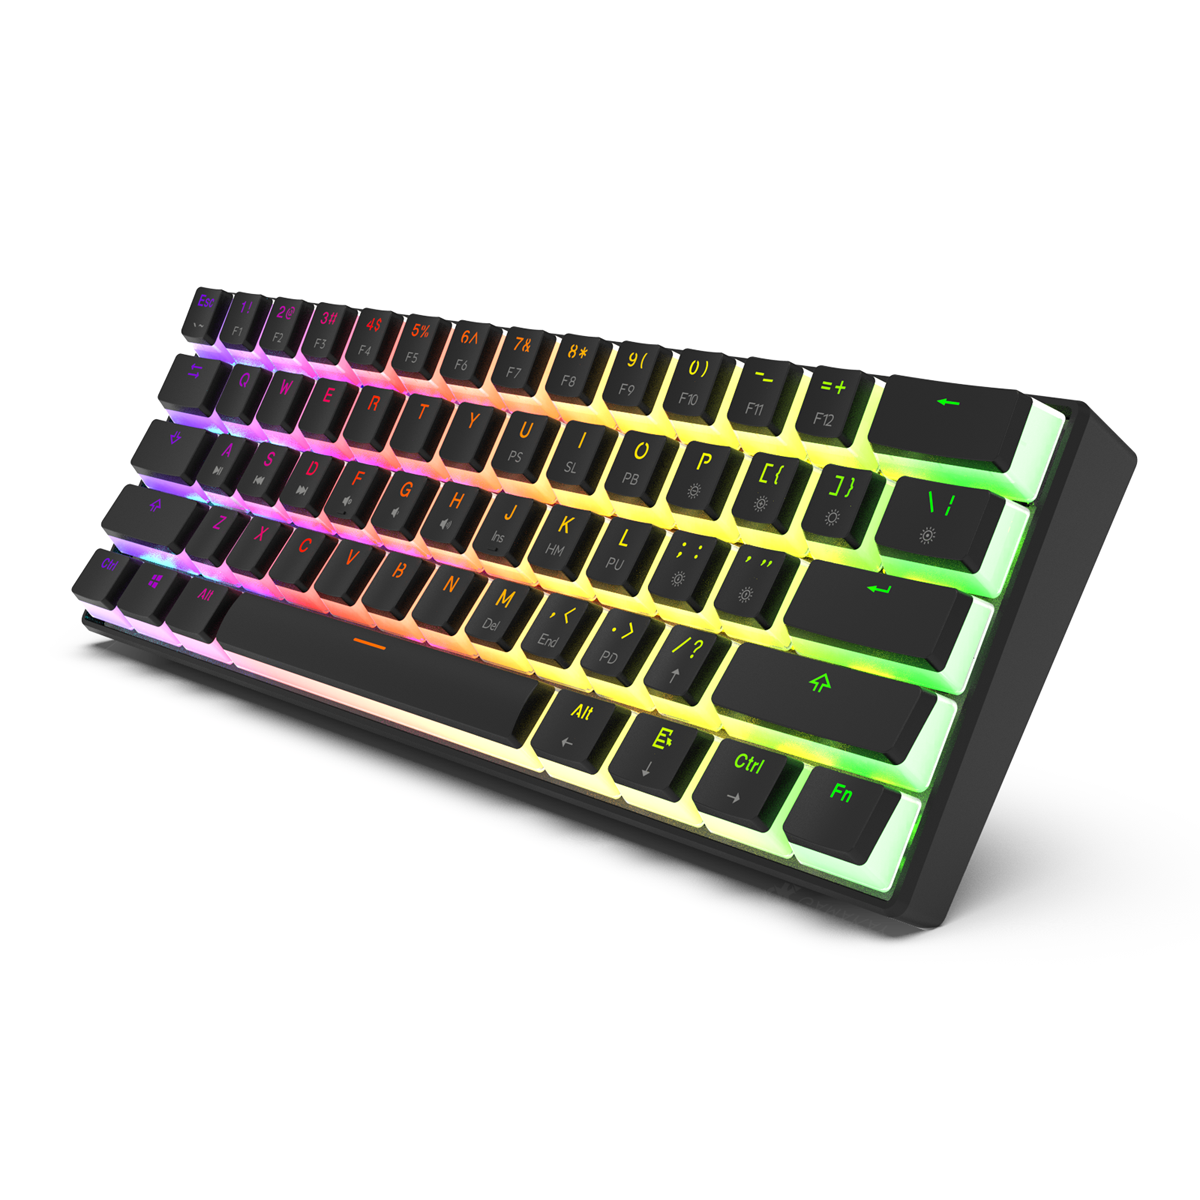 GAMAKAY MK61 Wired Mechanical Keyboard Gateron Optical Switch Pudding Keycaps RGB 61 Keys Hot Swappable Gaming Keyboard New Version